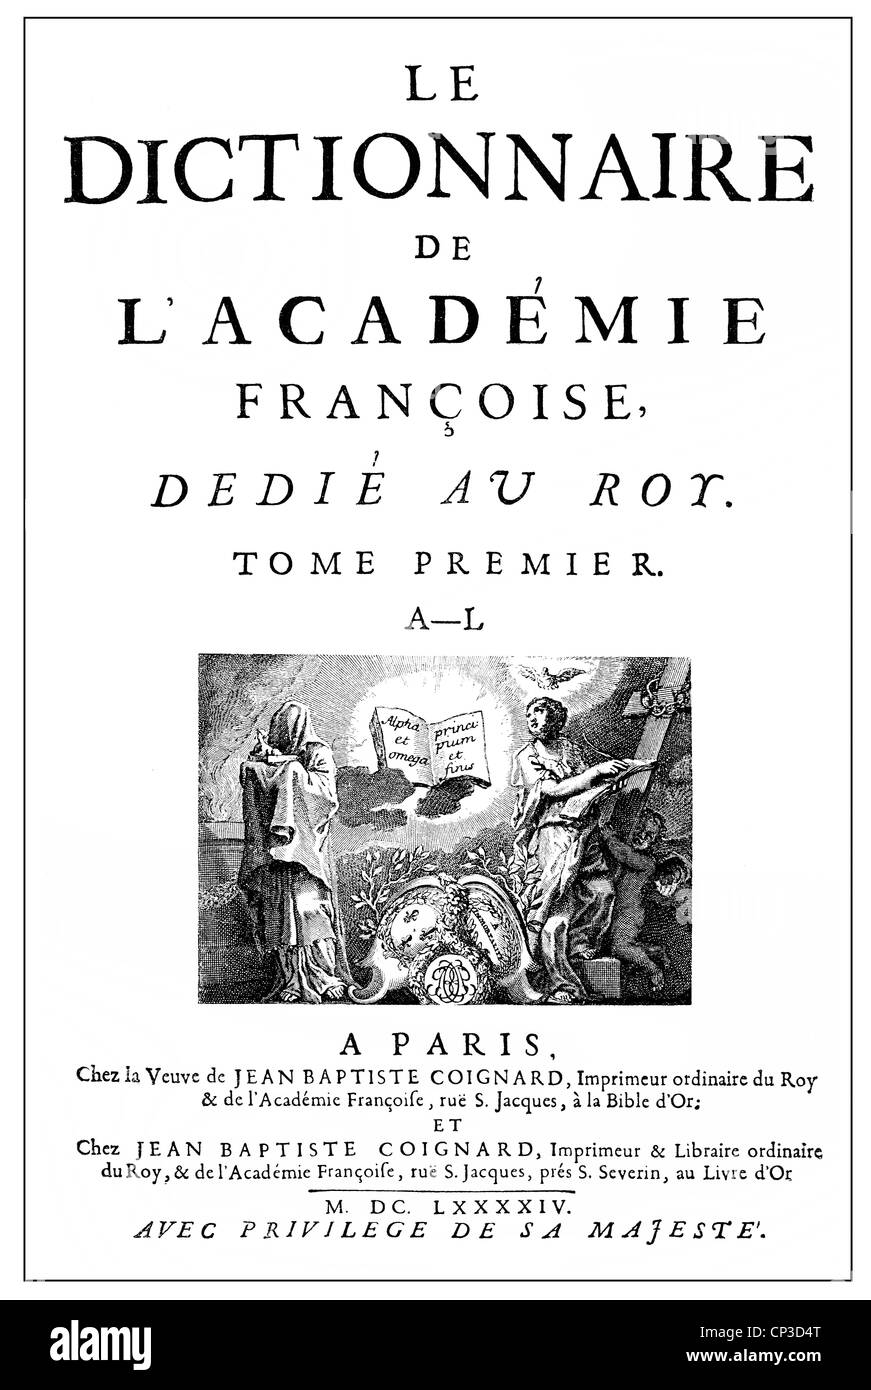 title-page of the first Edition of the dictionary of the French academic society Académie Française or French Academy, 1694 Stock Photo